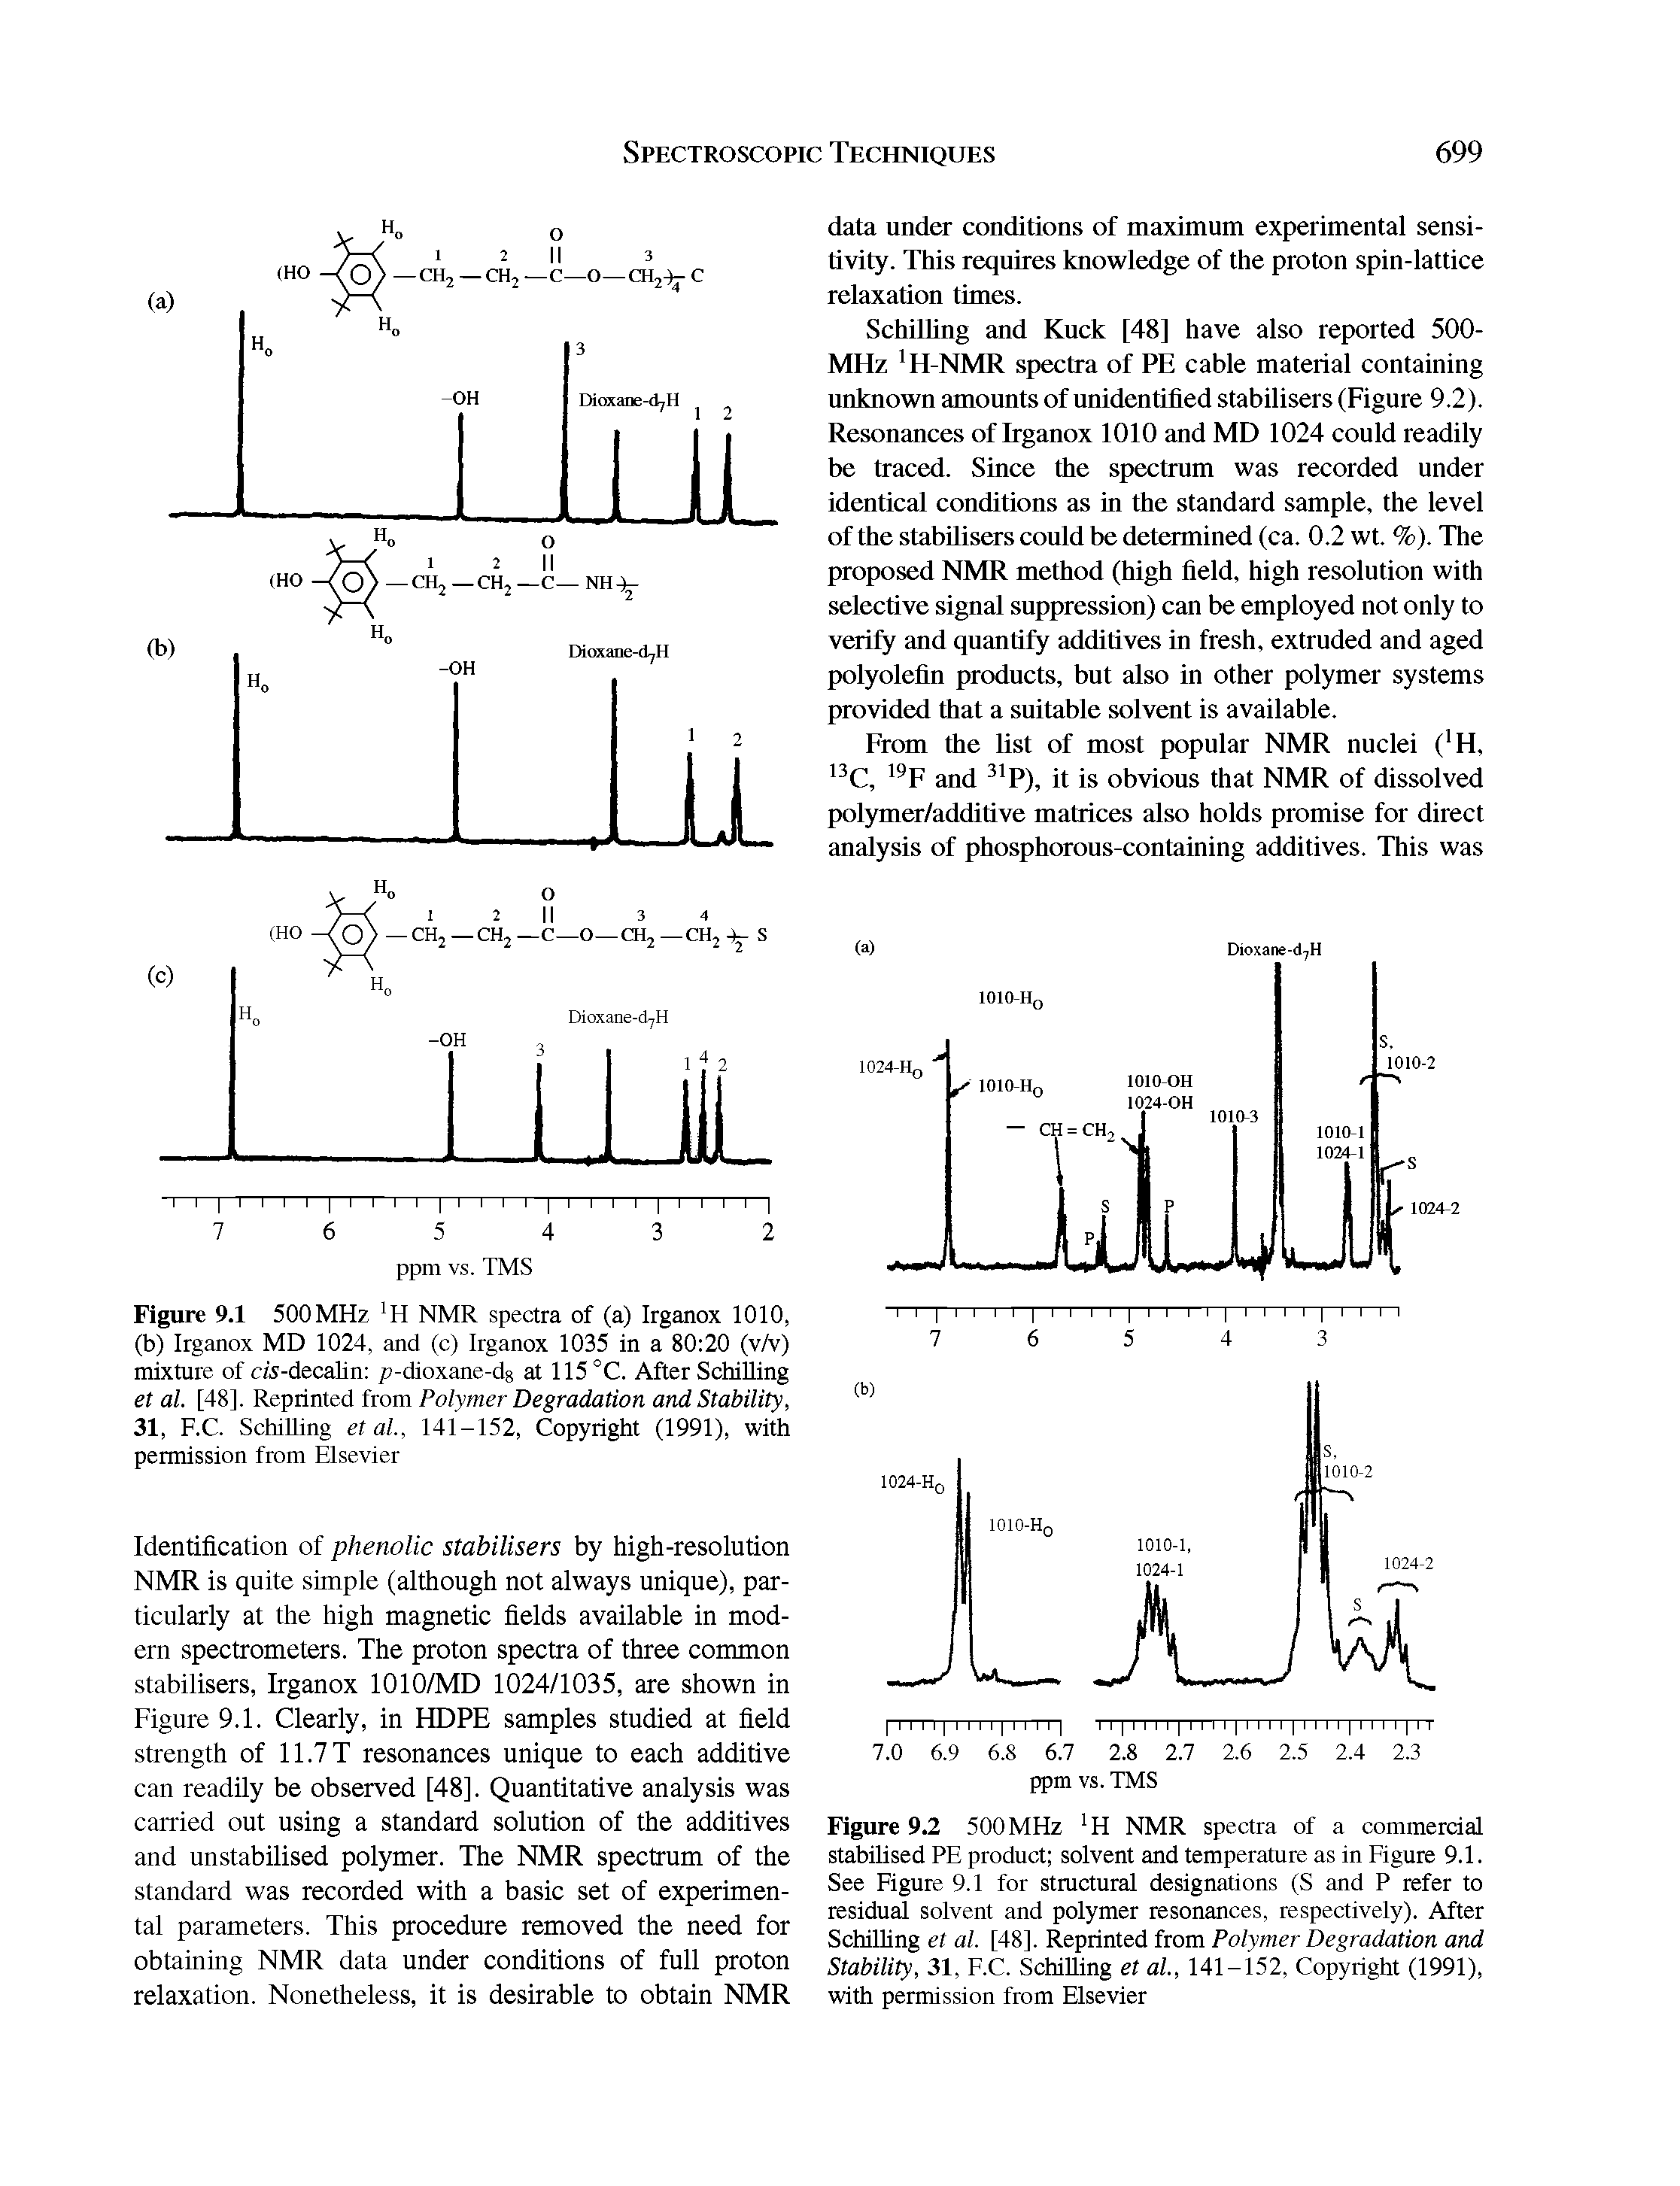 Figure 9.2 500 MHz H NMR spectra of a commercial stabilised PE product solvent and temperature as in Figure 9.1. See Figure 9.1 for structural designations (S and P refer to residual solvent and polymer resonances, respectively). After Schilling et al. [48]. Reprinted from Polymer Degradation and Stability, 31, F.C. Schilling et al., 141-152, Copyright (1991), with permission from Elsevier...